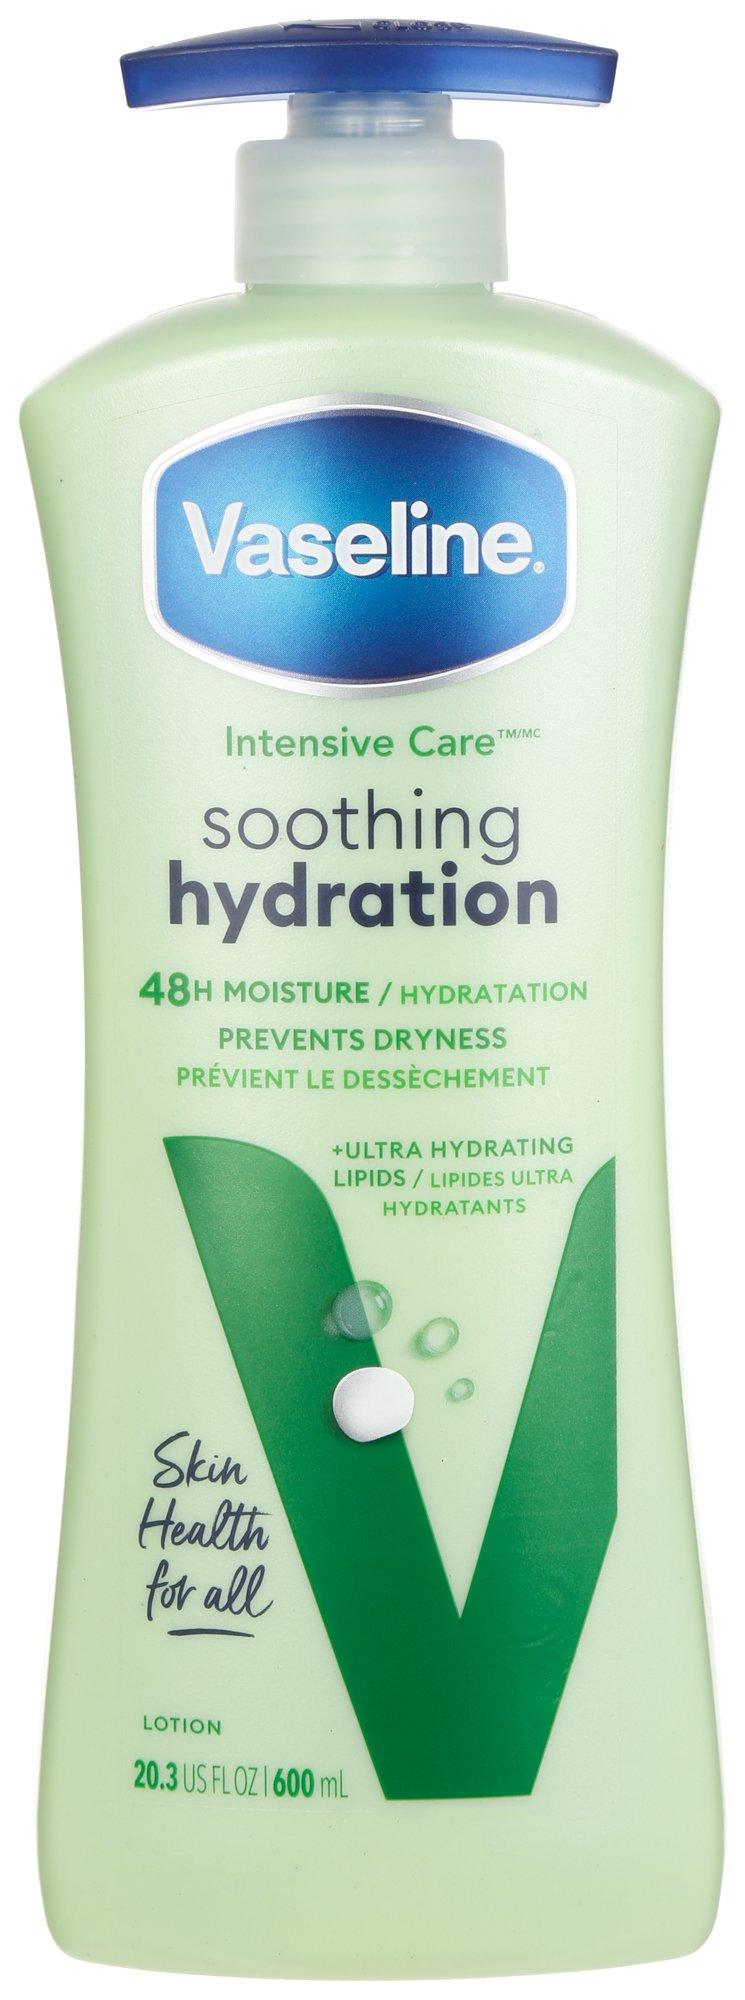 20 oz Soothing Hydration Moisture Lotion